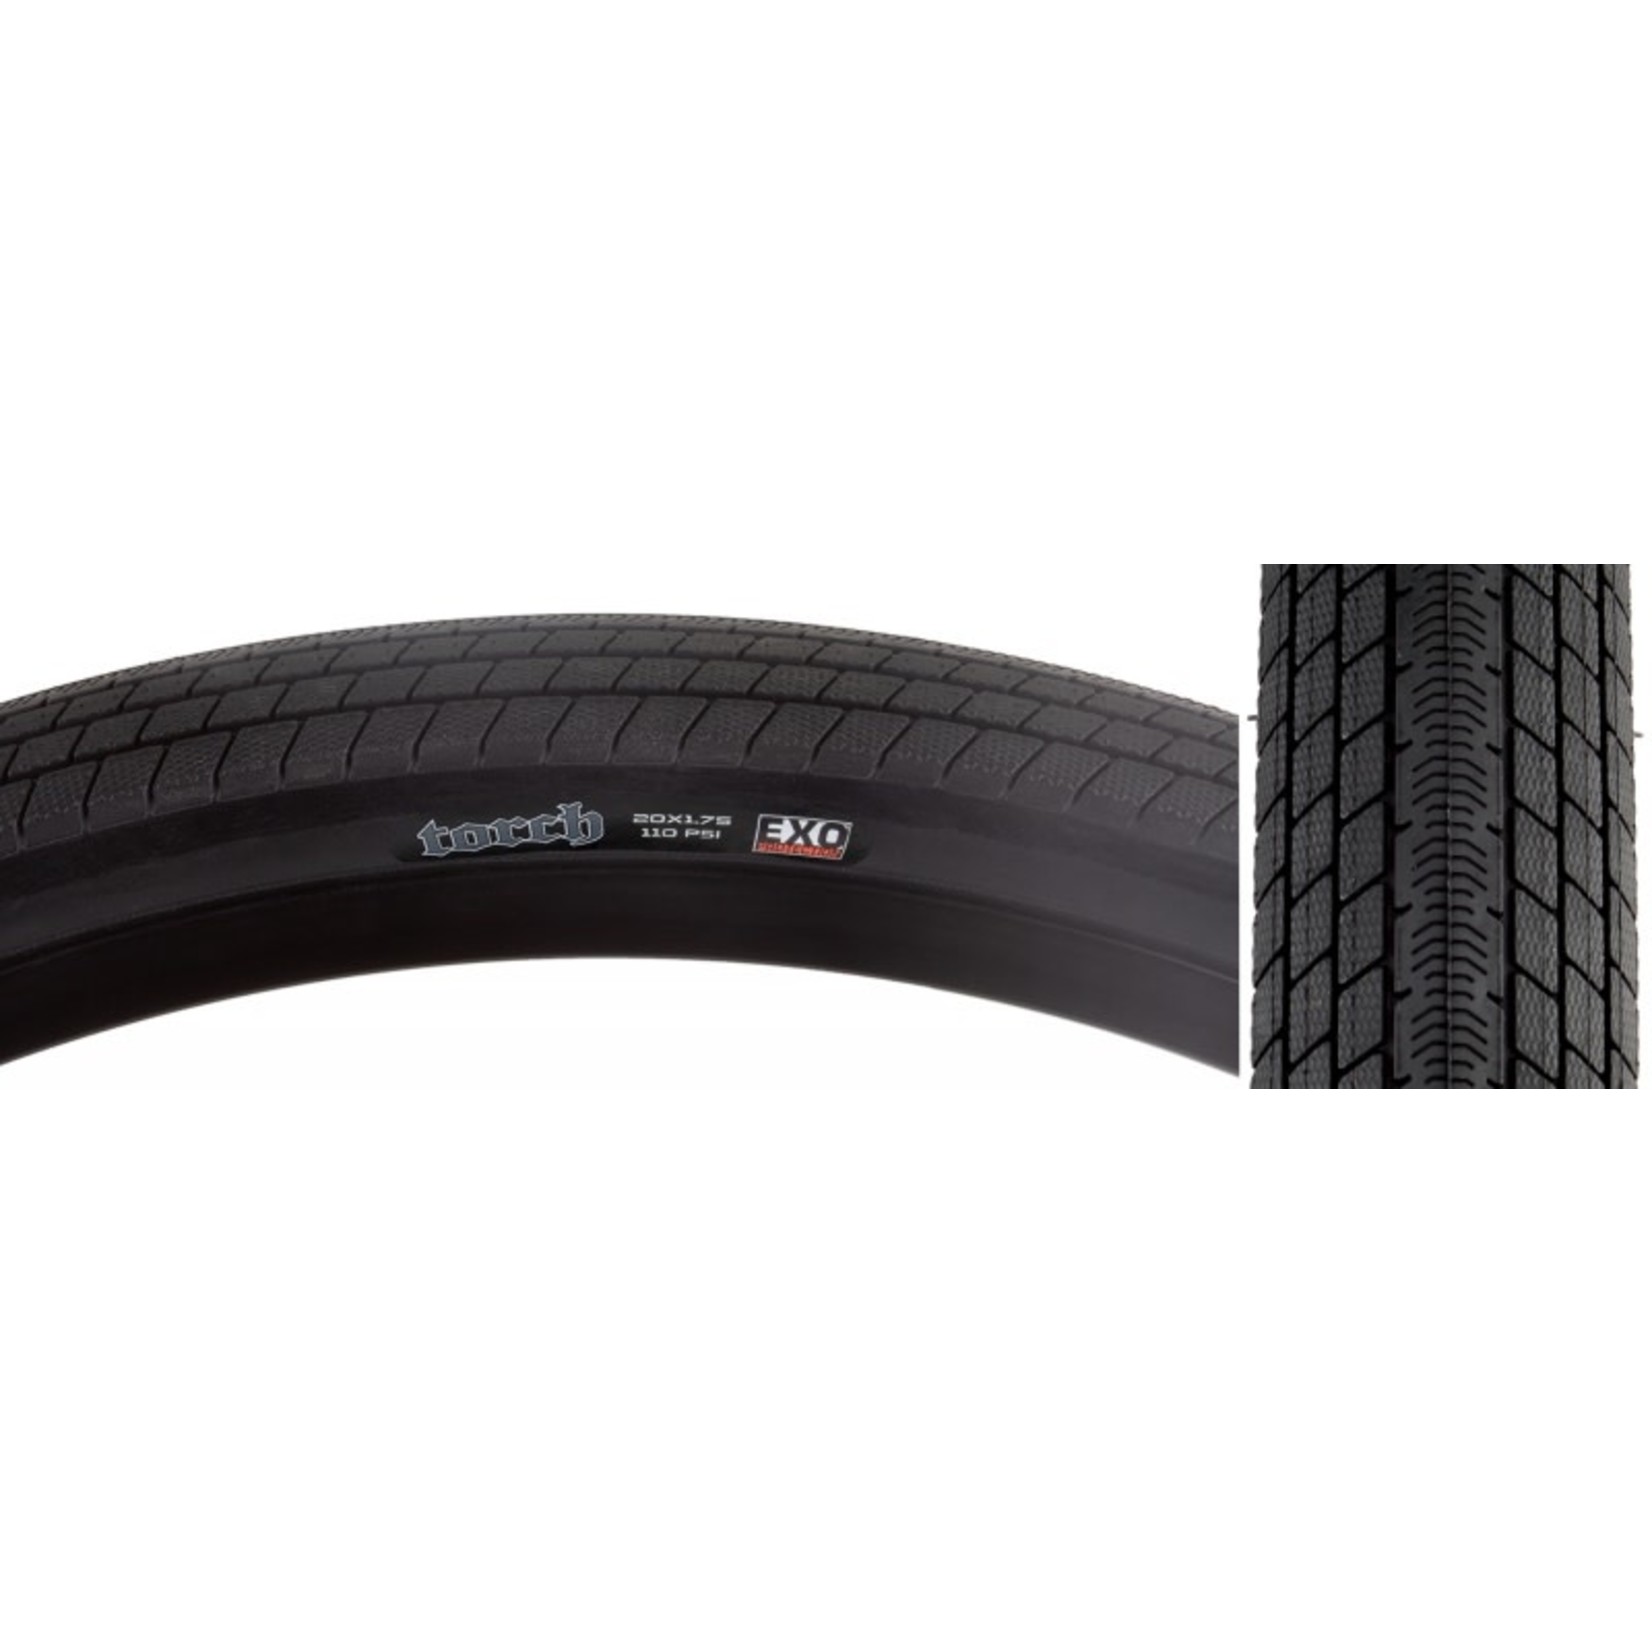 Maxxis Torch TR EXO/TR 20 x 1.75 Tubeless Folding